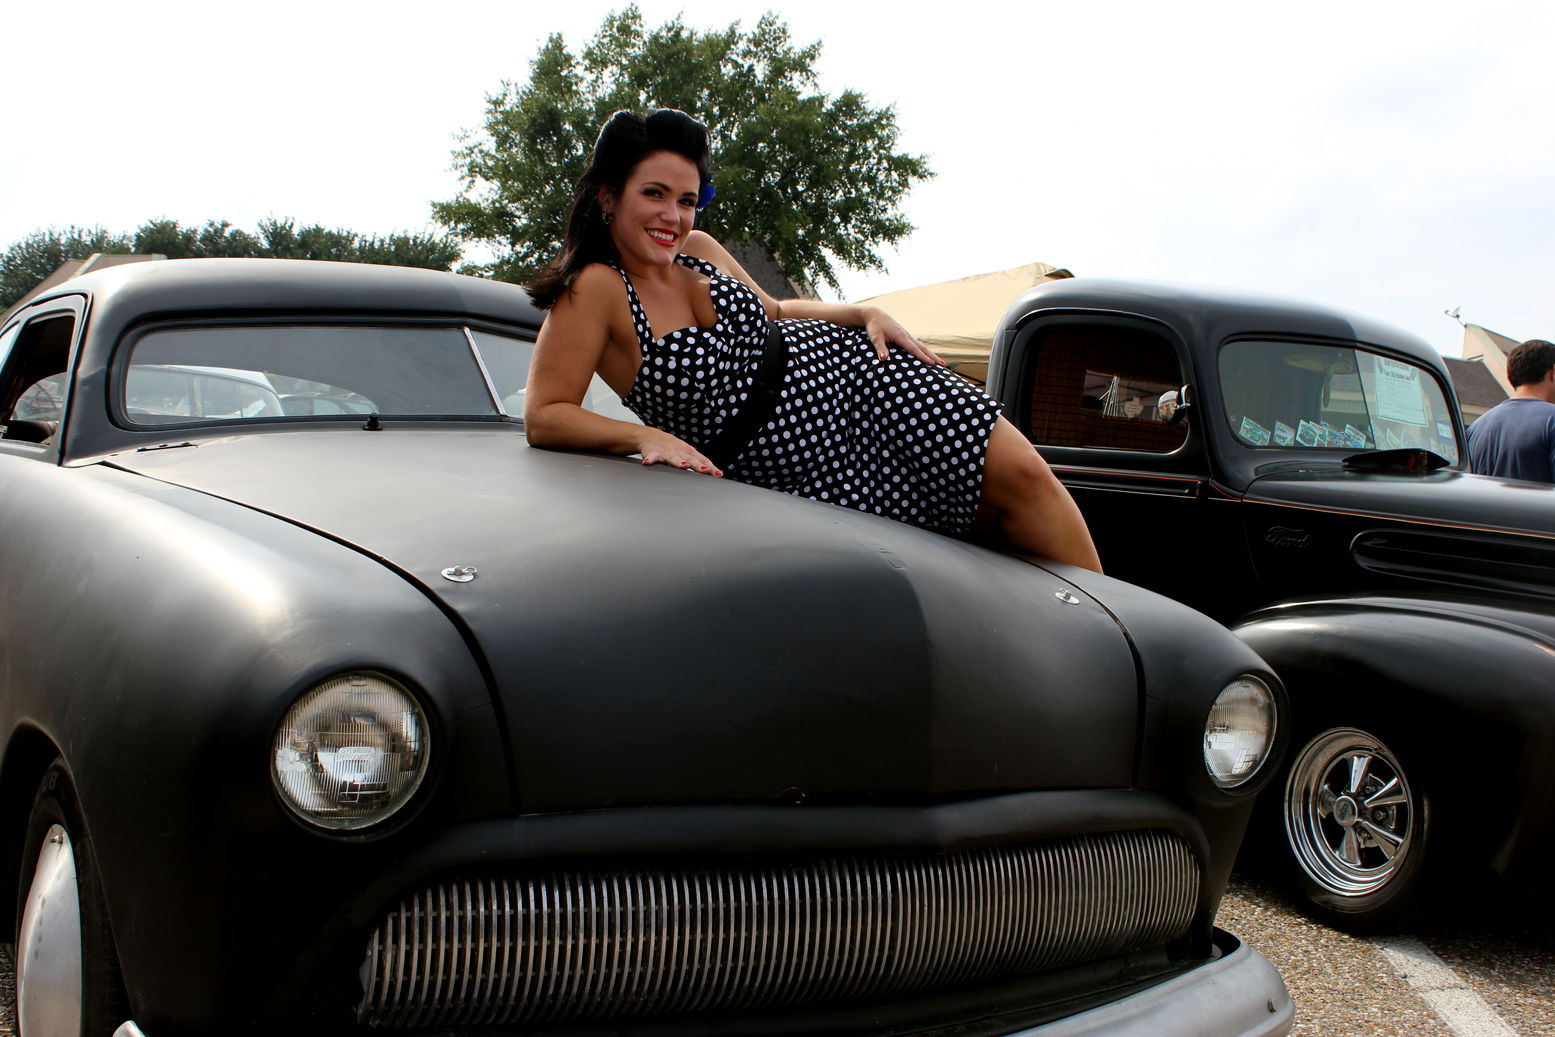 A guest at the Twin City Bomber Bash poses for a photo.